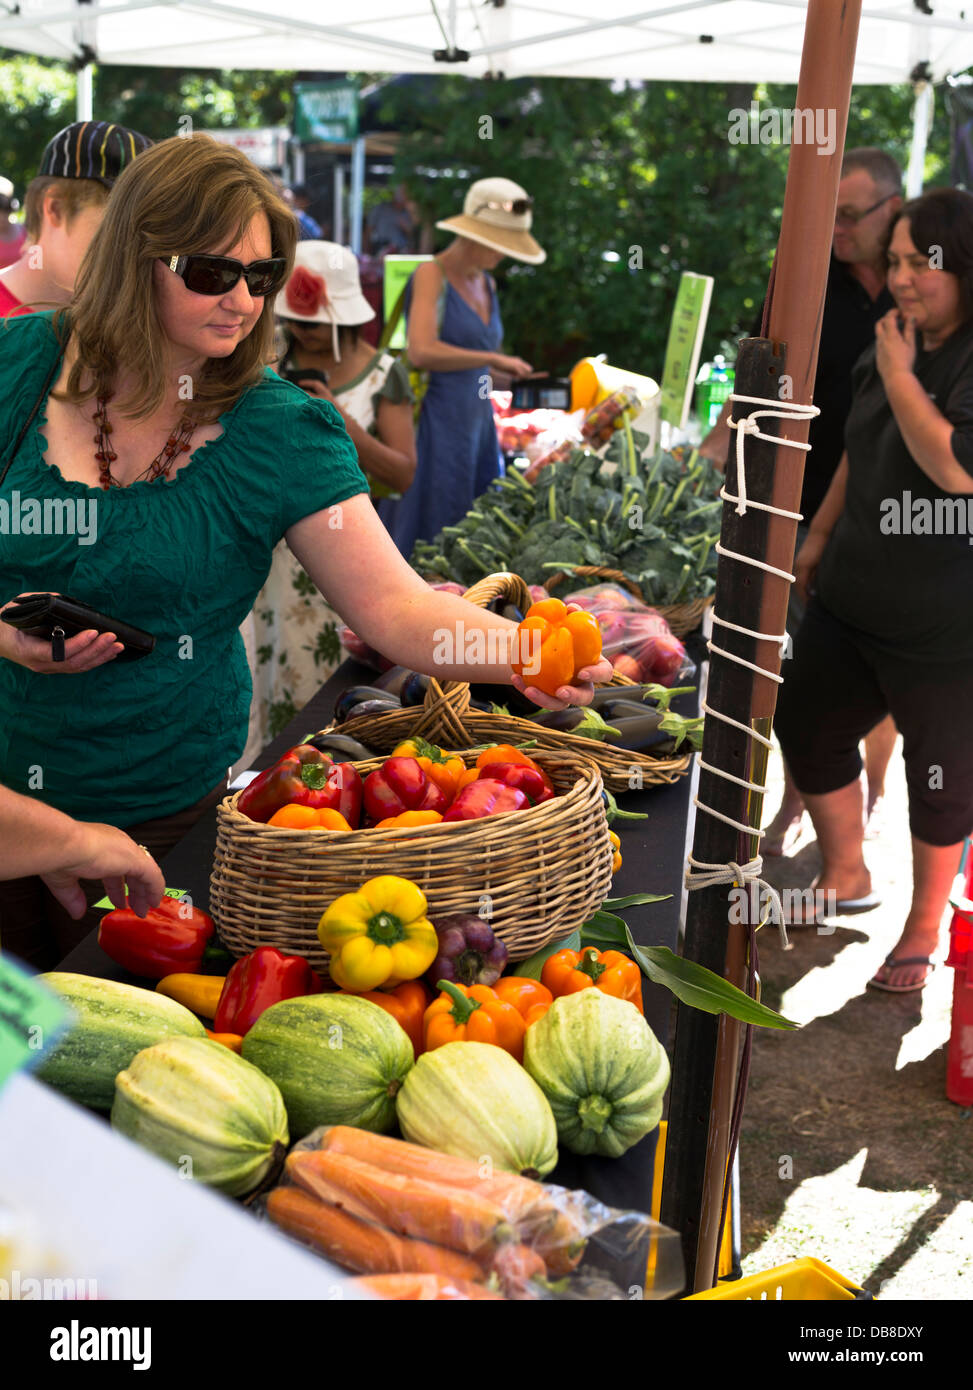 dh Sunday Market hawkes bay HASTINGS NEW ZEALAND Lady picking vegetables green grocers stall grocer fruit food Stock Photo